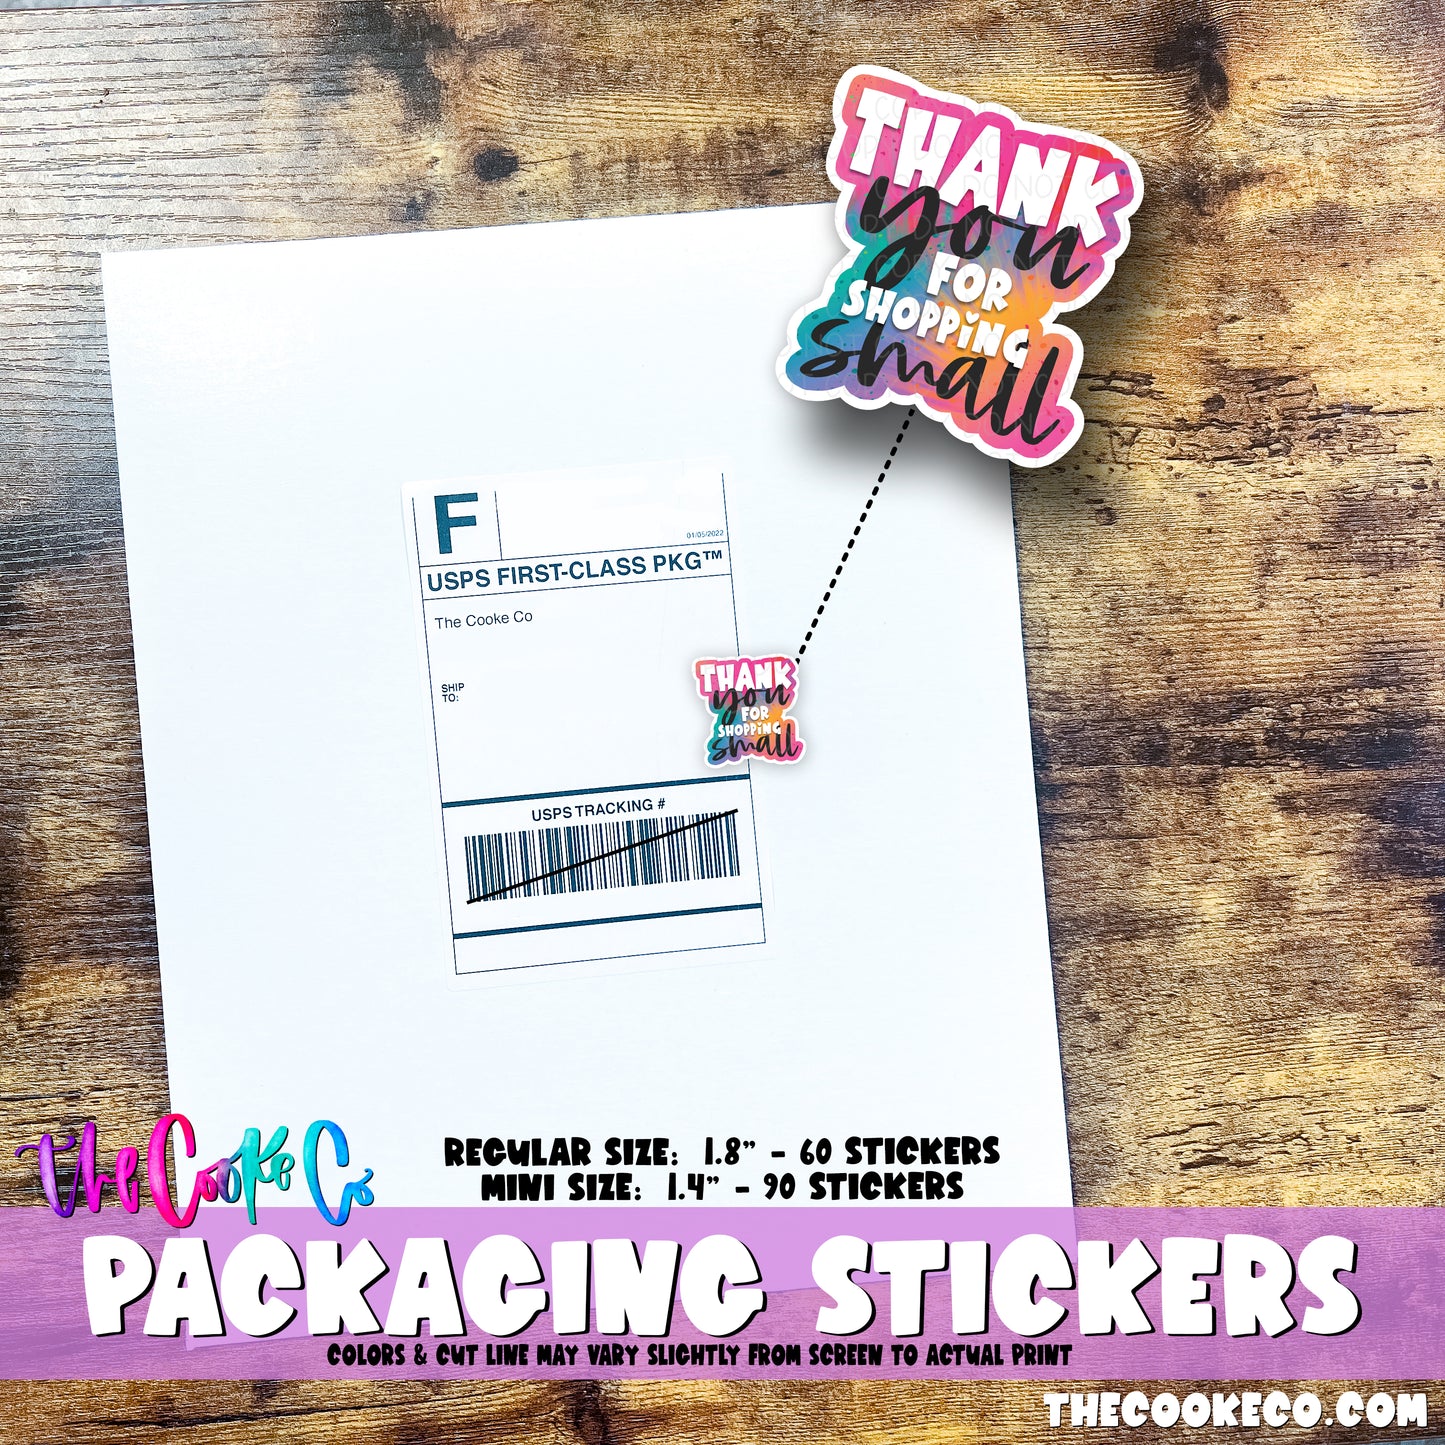 Packaging Stickers | #C0871 - THANK YOU FOR SHOPPING SMALL